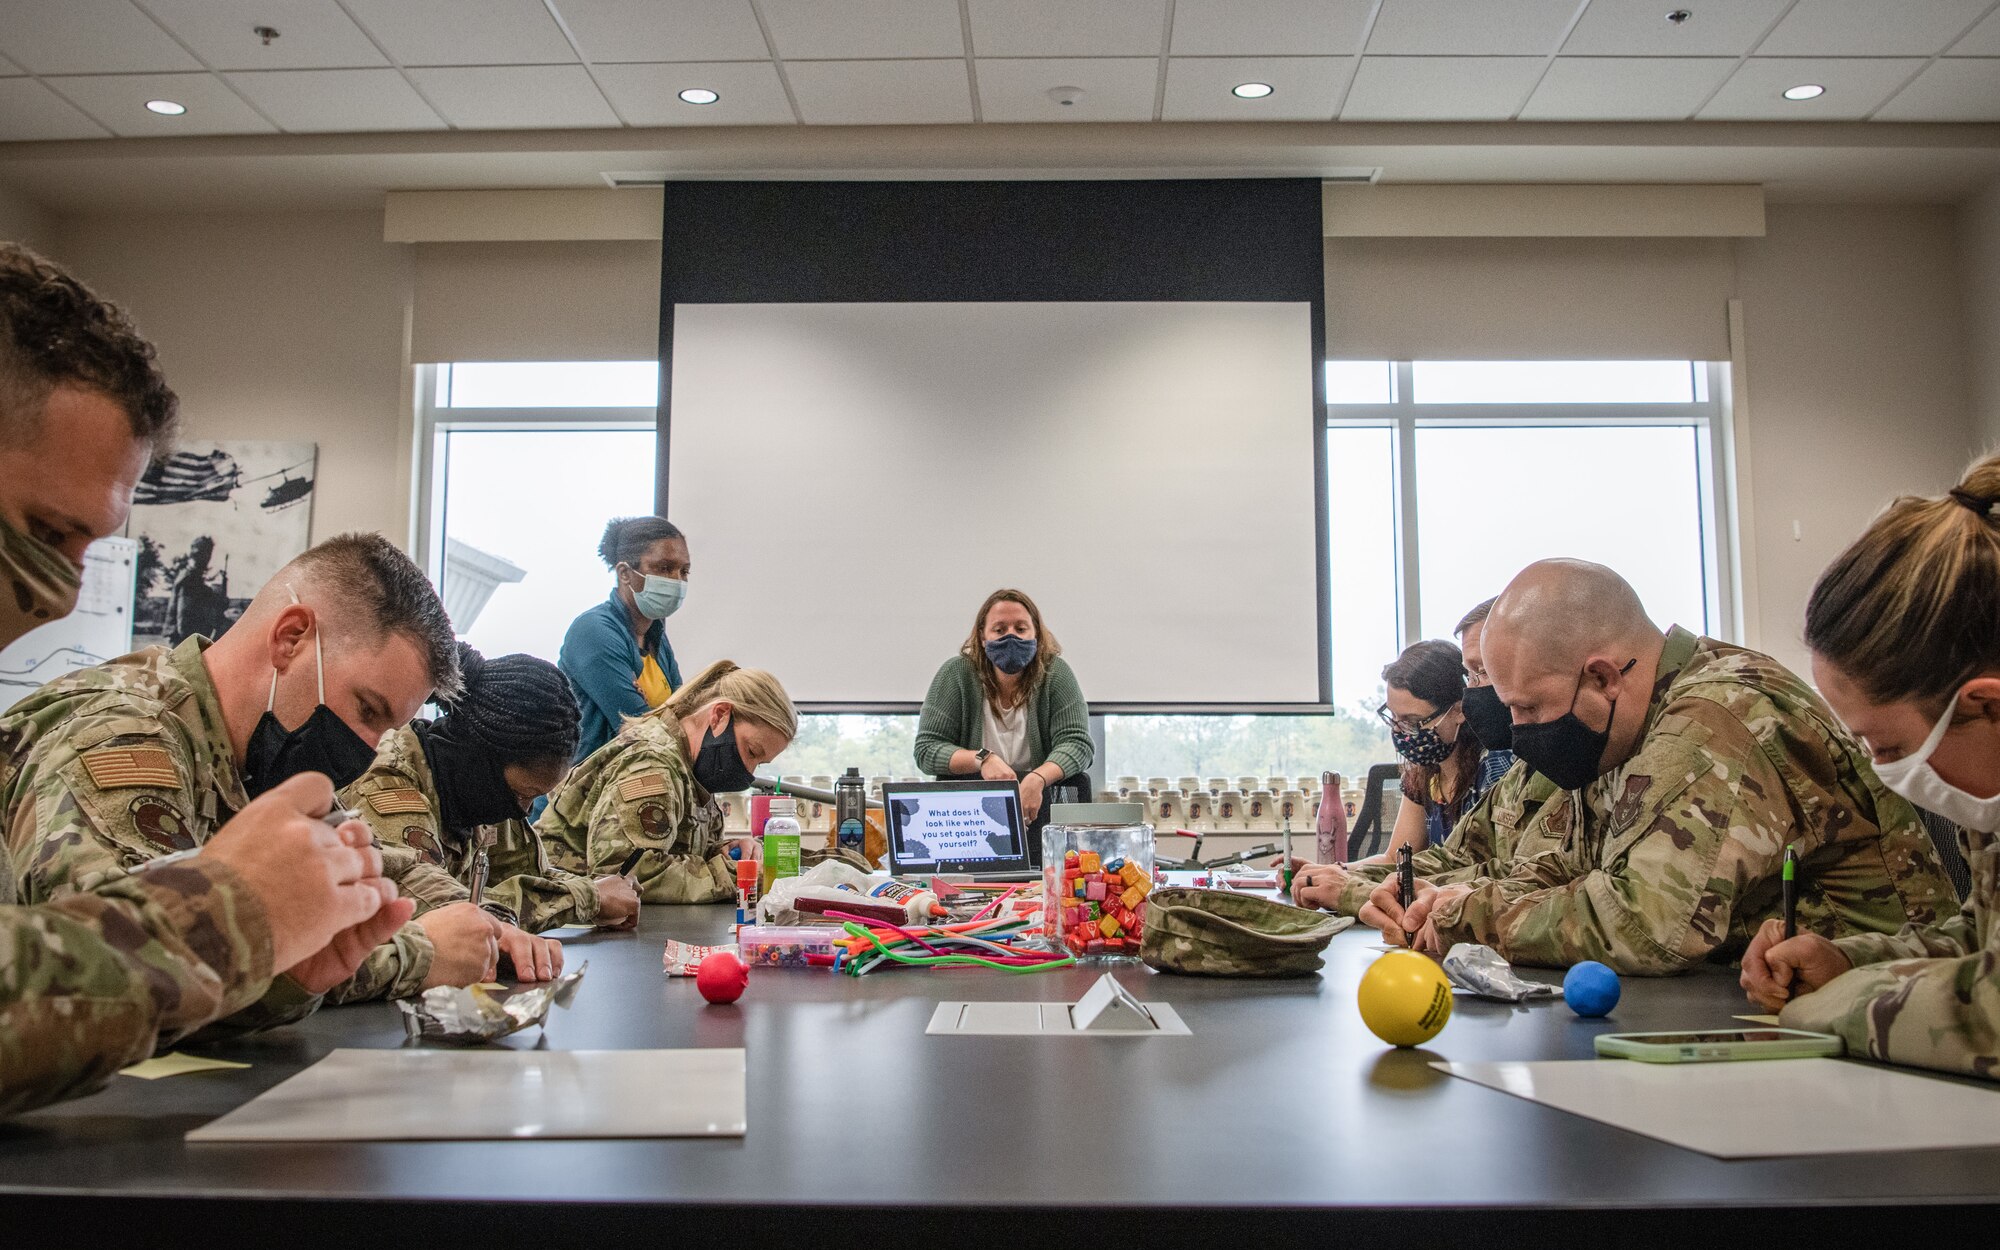 A group of Airmen sit at a table and write on notepads as a civilian woman watches.